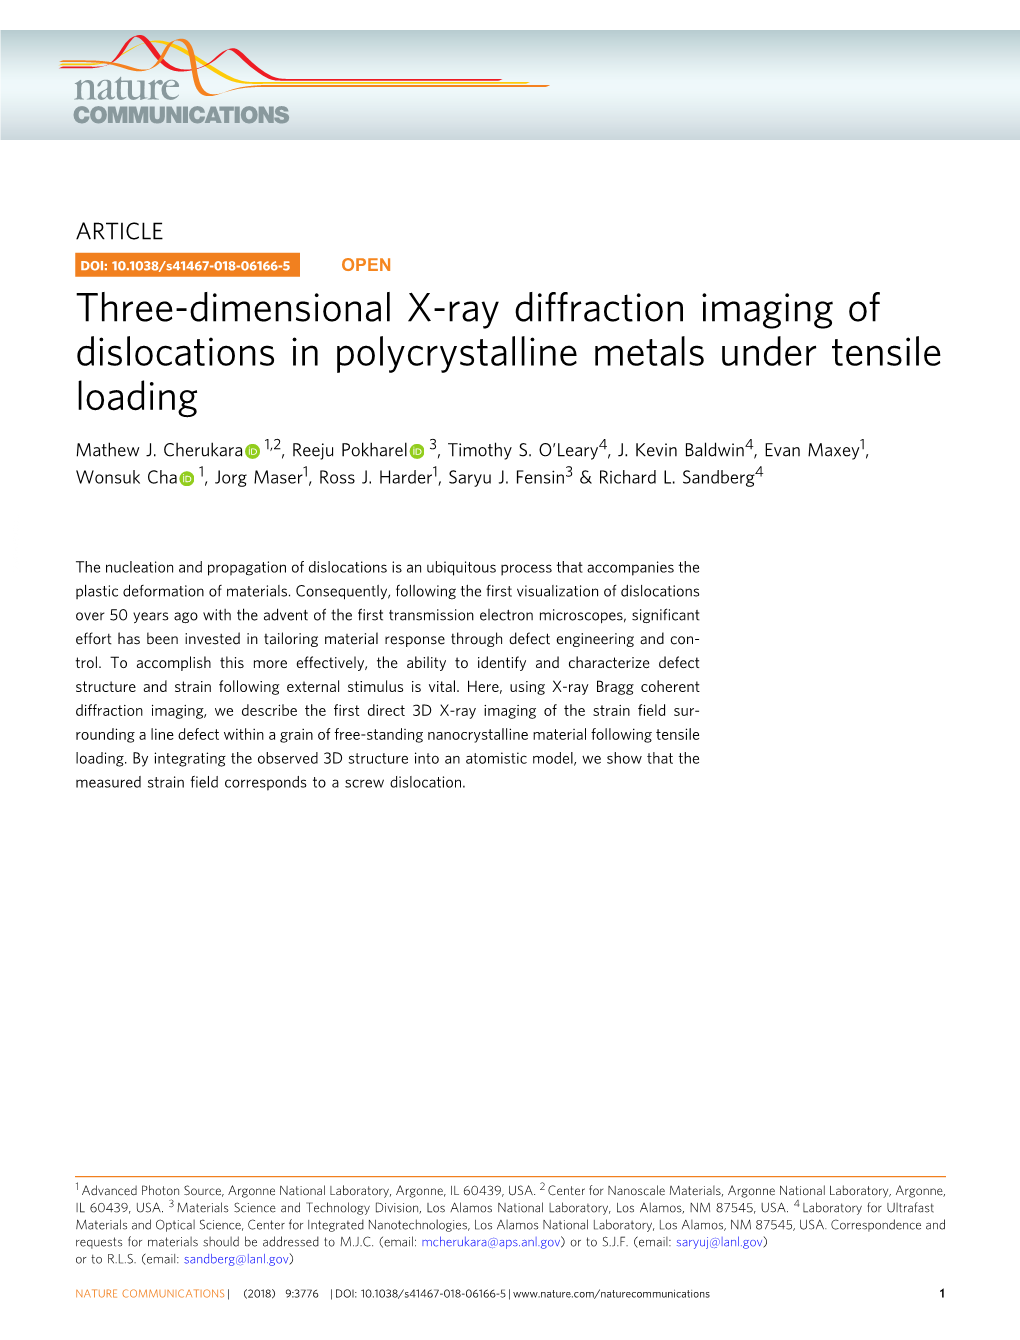 Three-Dimensional X-Ray Diffraction Imaging of Dislocations in Polycrystalline Metals Under Tensile Loading